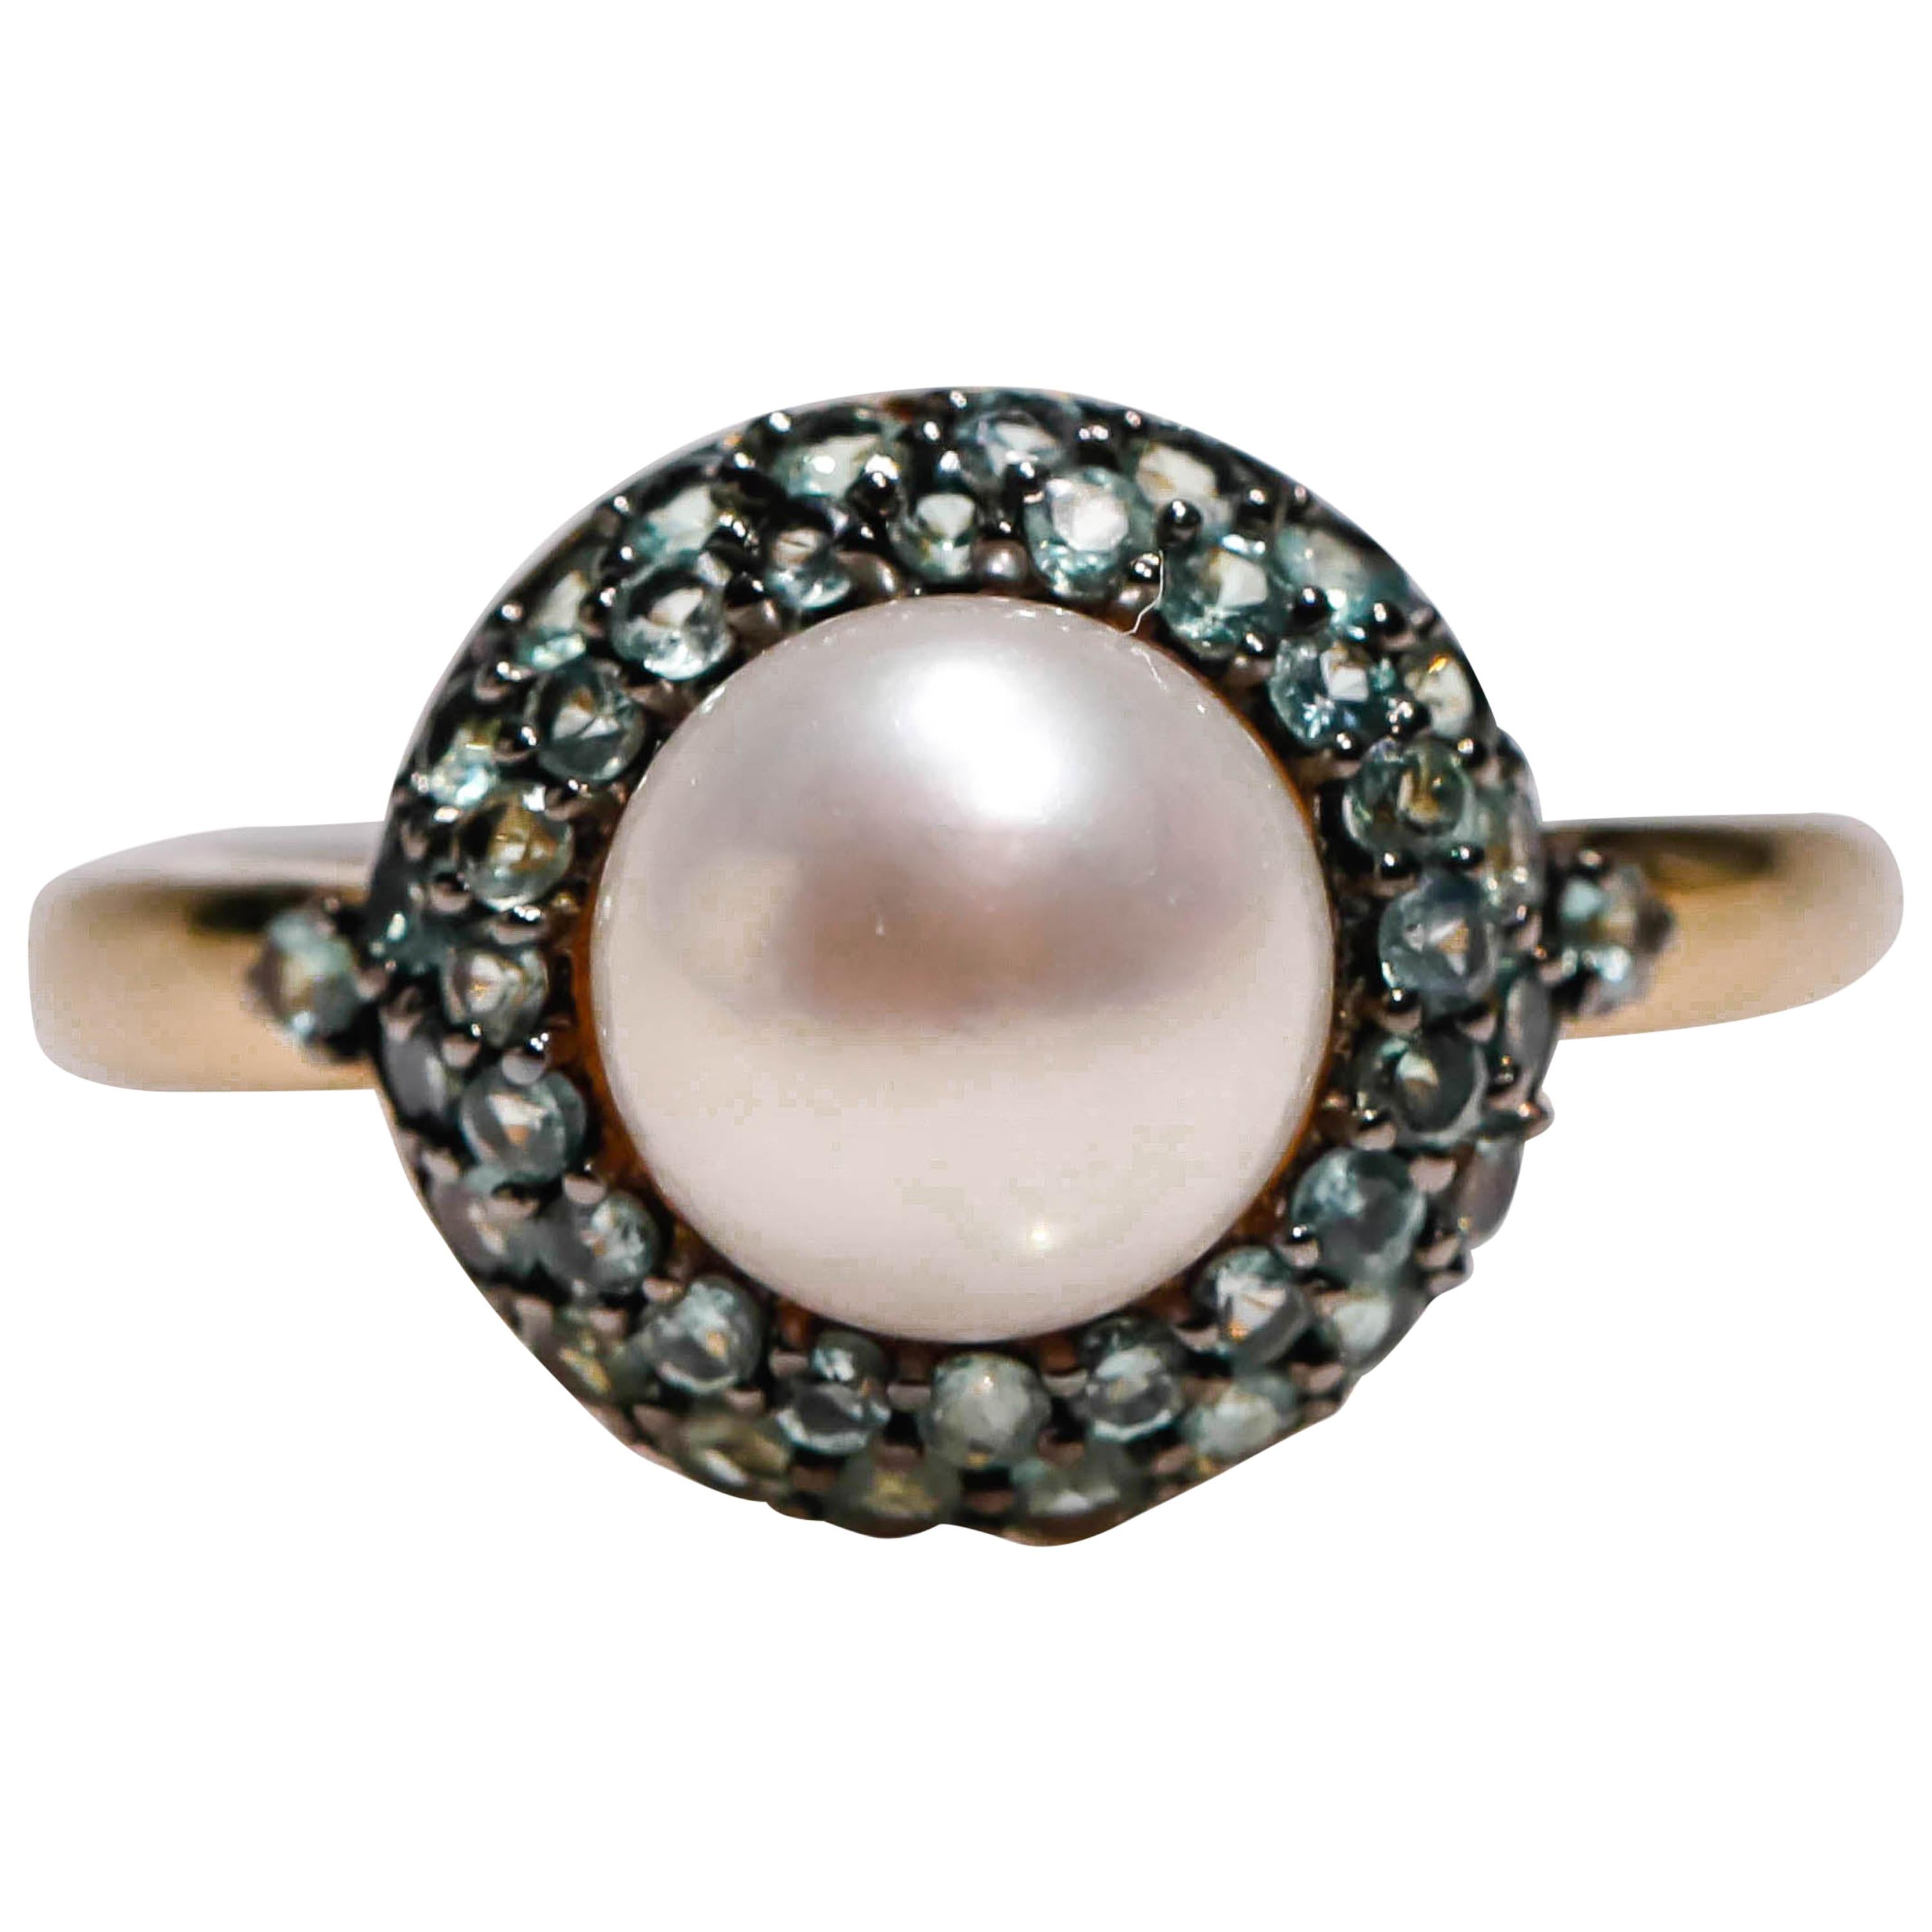 Natural Pearl 0.7 Carat Round Alexandrite 14 Karat Yellow Gold Cocktail Ring Size 5.5

Natural Pearl Cocktail Ring, set in stunning 14k Yellow Gold. 0.7 CTW Round cut Dark Alexandrite is Pave on the mount of the ring, embraced by natural white Pearl